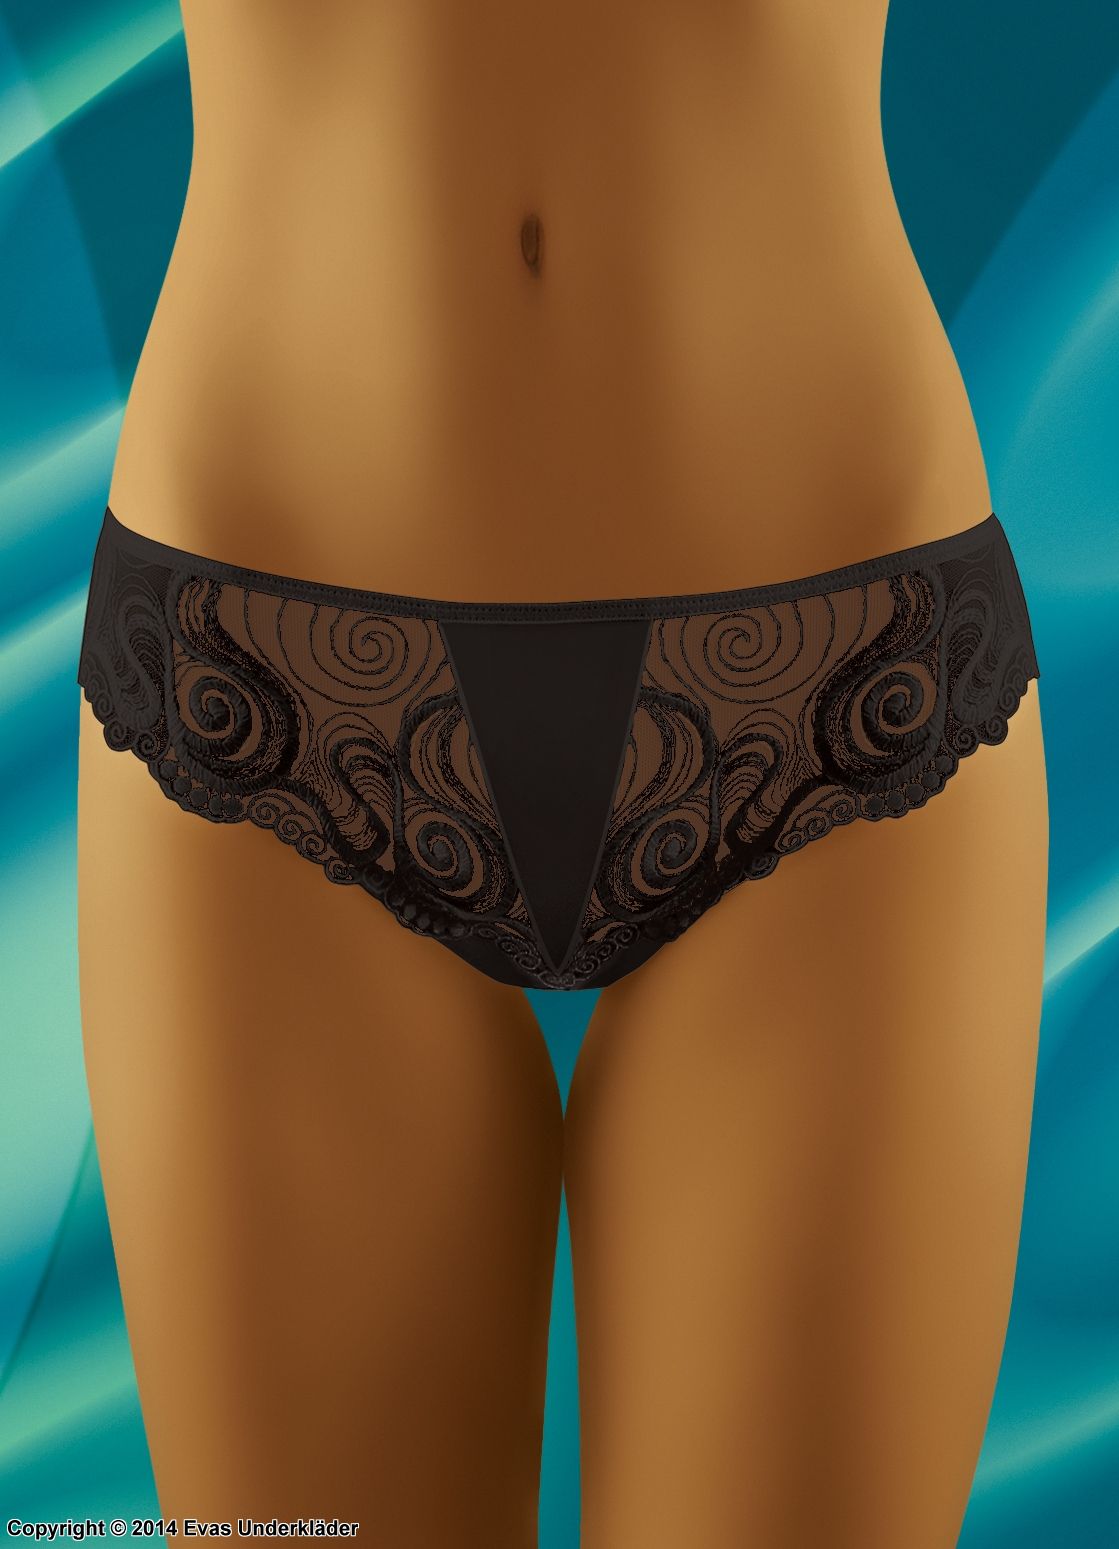 Hipster panty with embroidered swirls